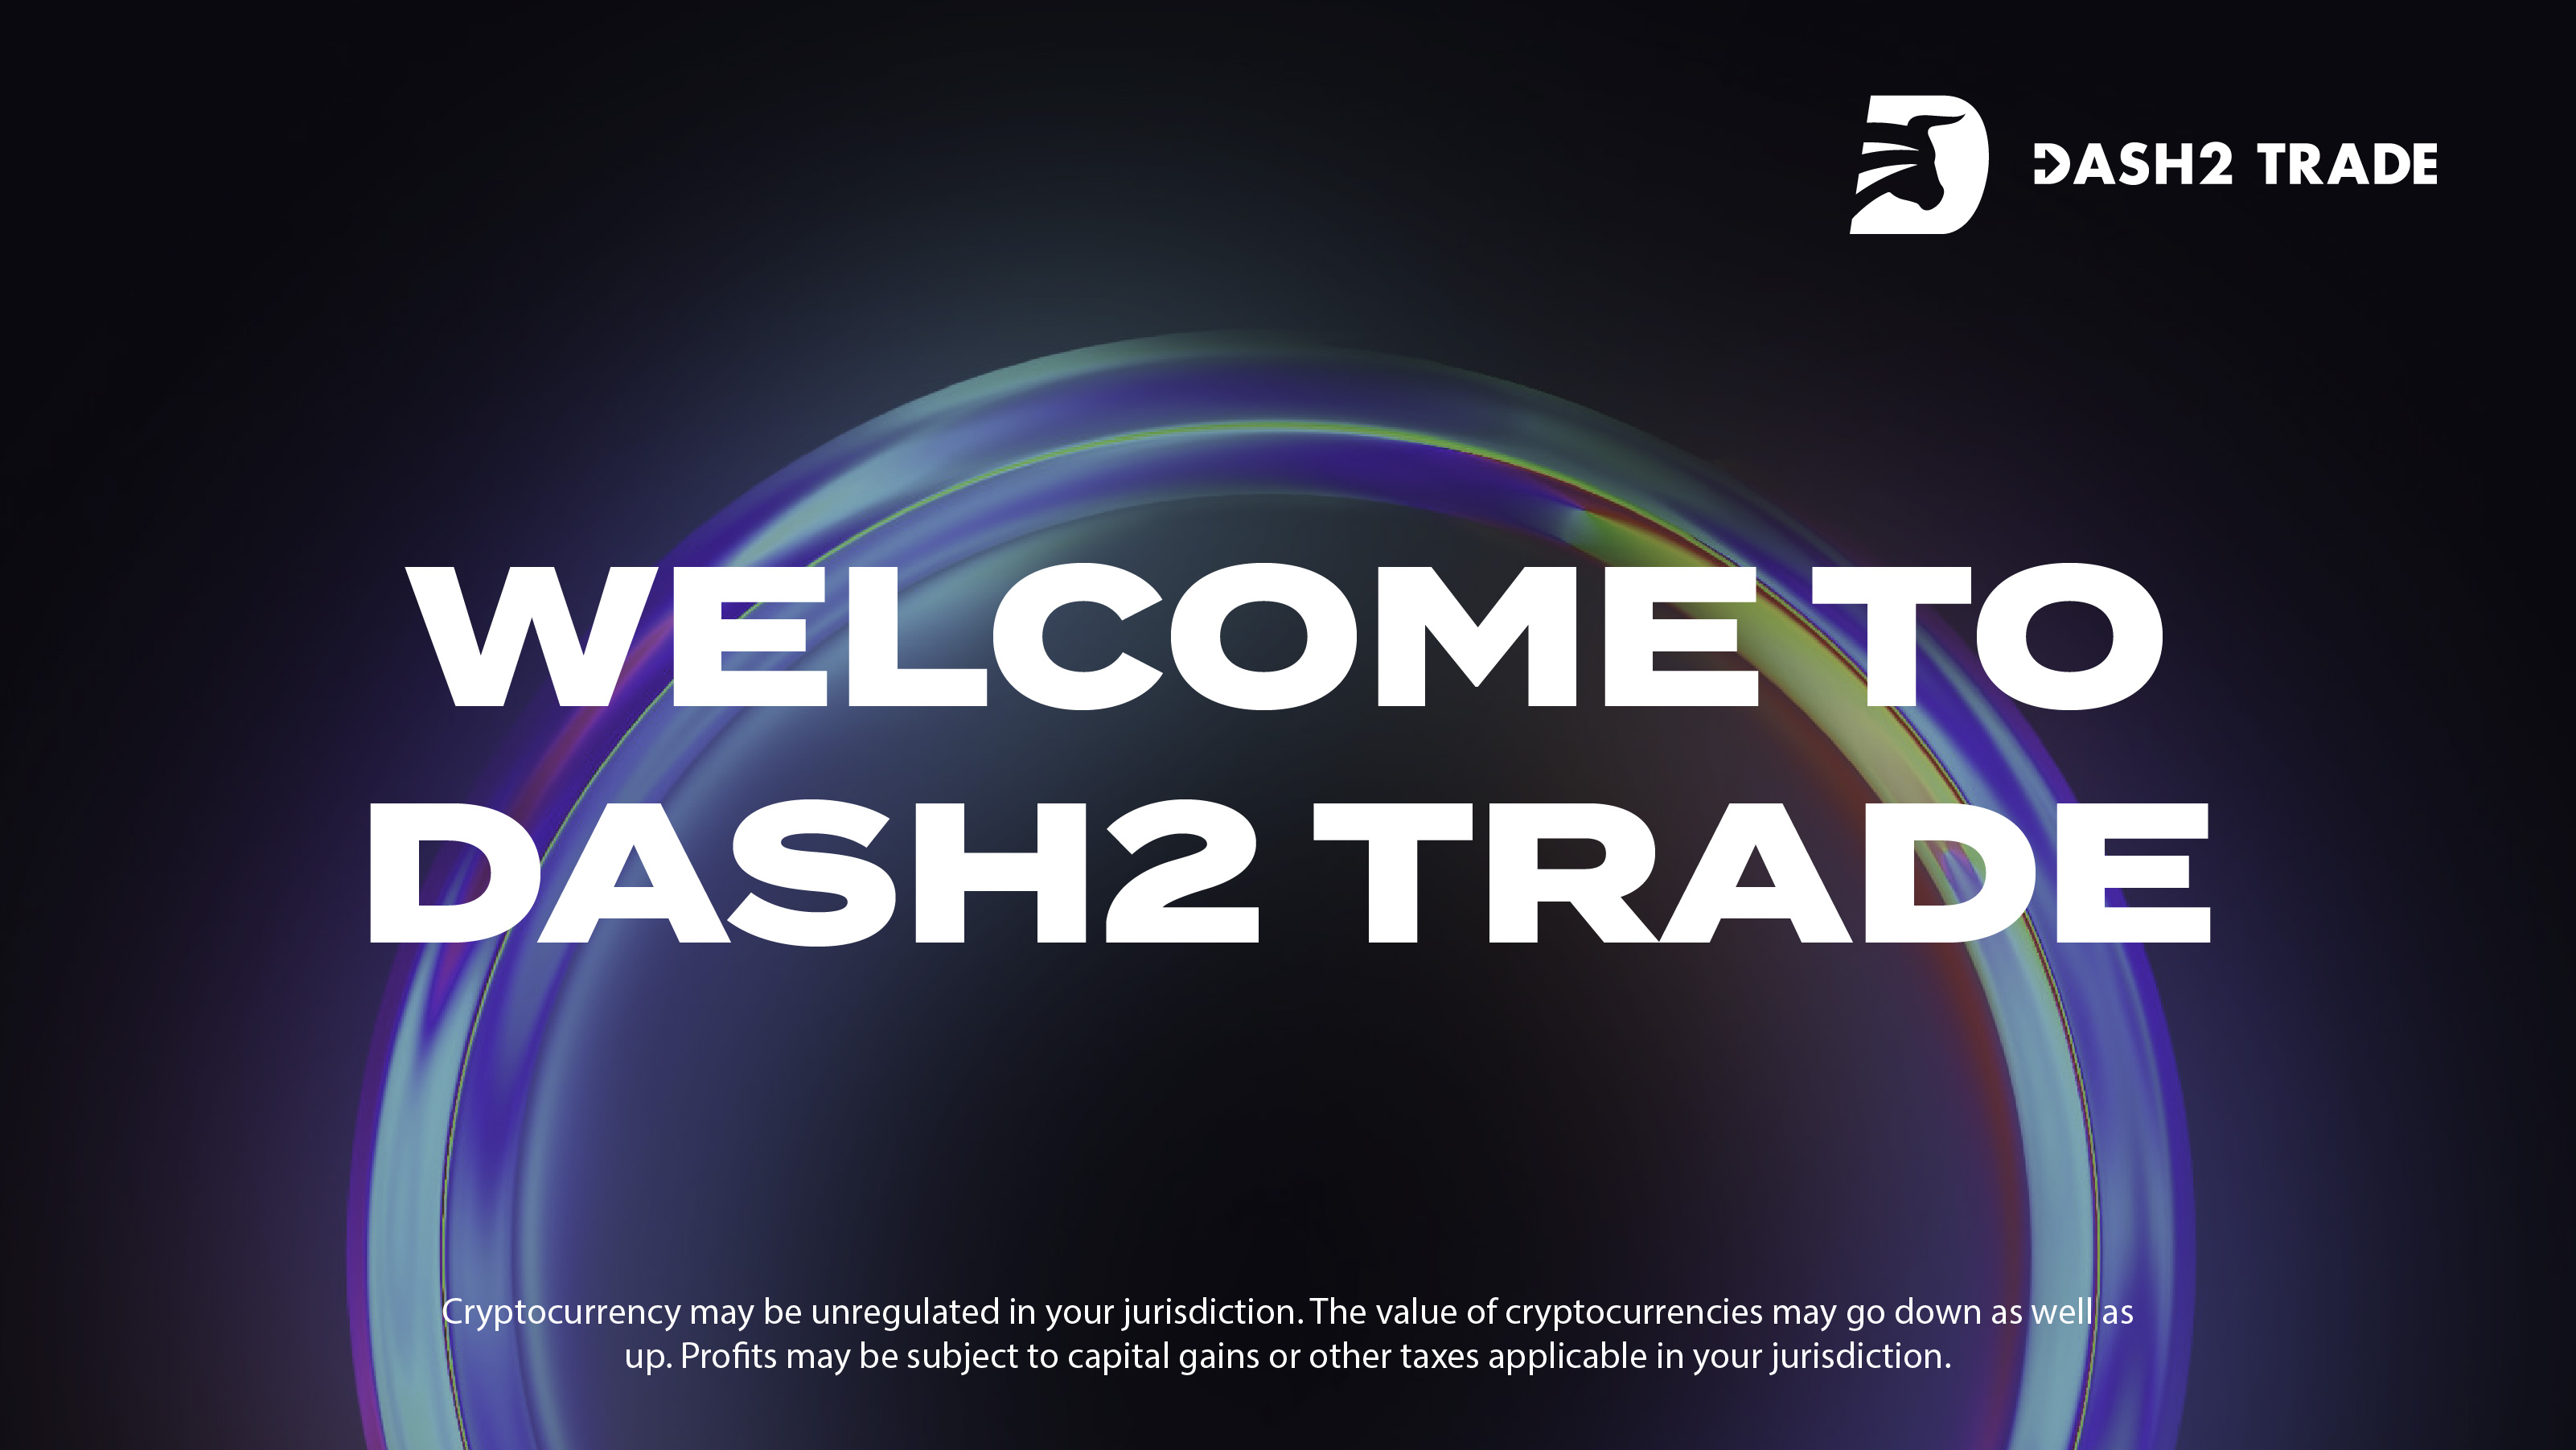 Dash 2 Trade is the Bloomberg Terminal Crypto Has Been Waiting For